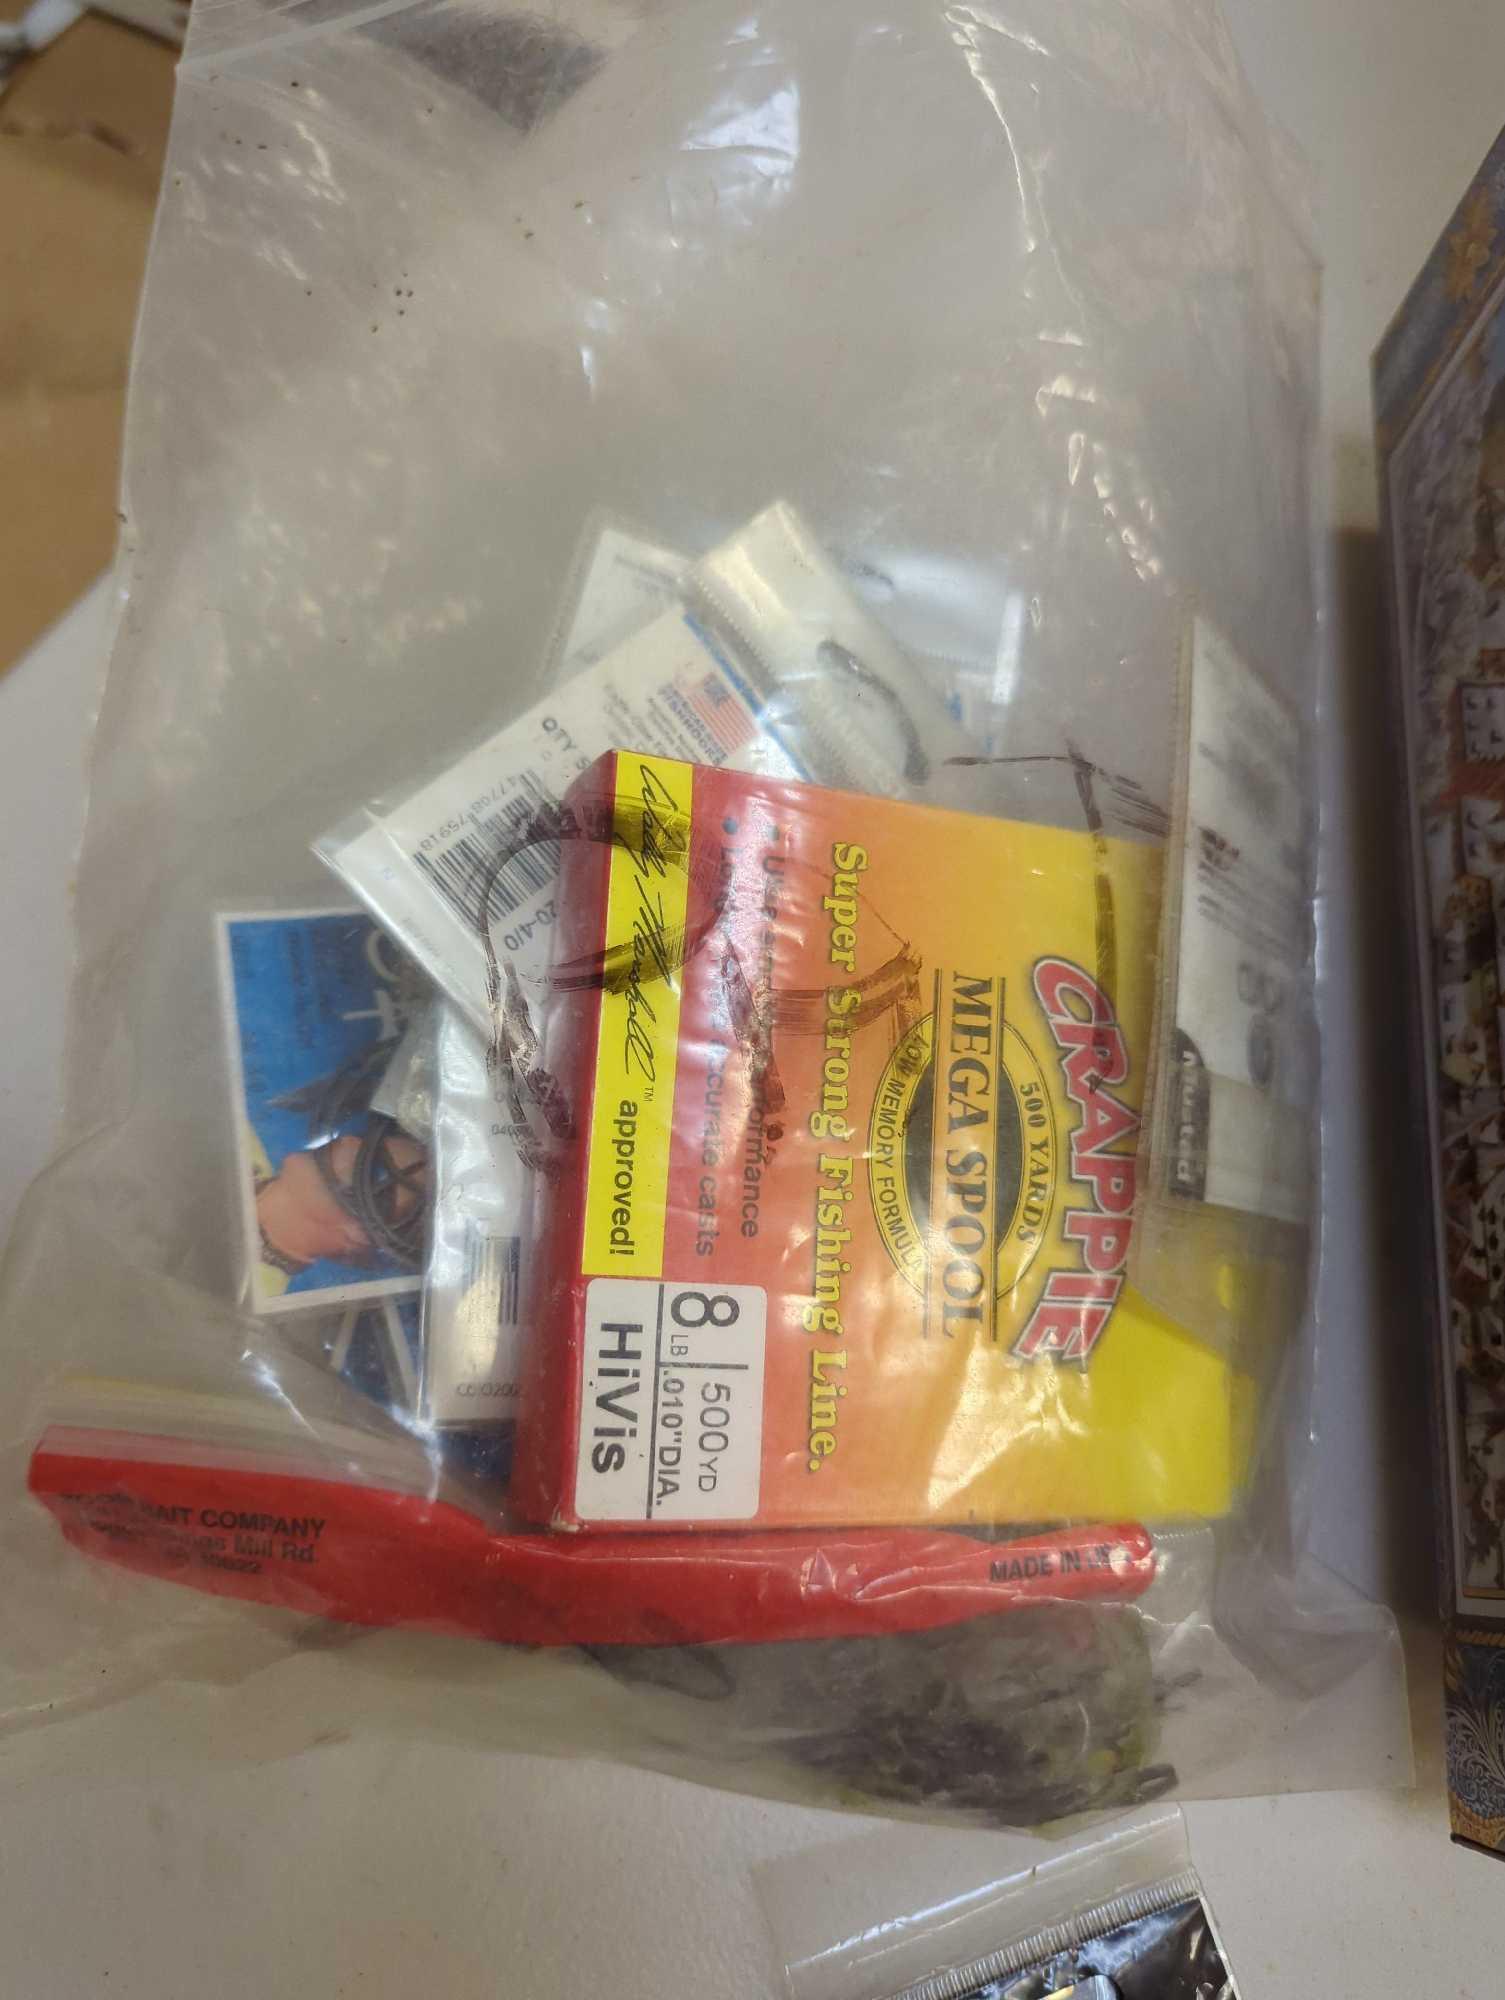 Large tin and contents including various fishing lures and fishing accessories. Comes as is shown in